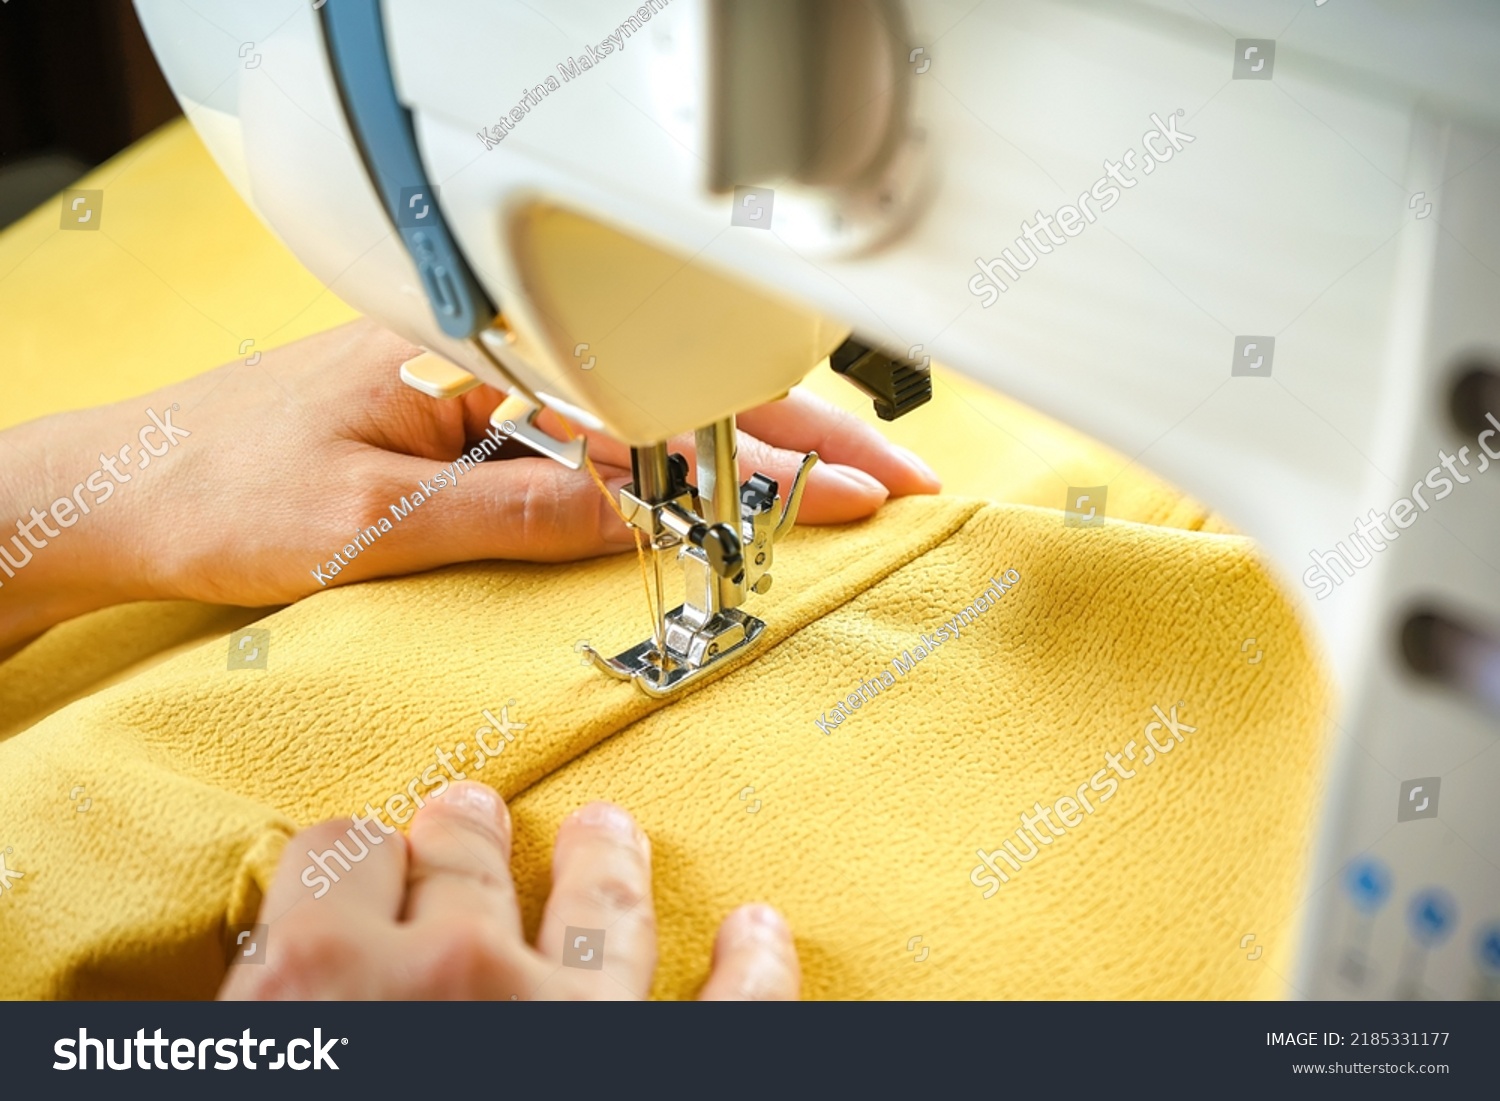 Seamstress female hands holding and stitching yellow textile fabric on modern sewing machine at workplace. Sewing process, upholstery, clothes, repair, DIY. Handmade, hobby, small business concept #2185331177